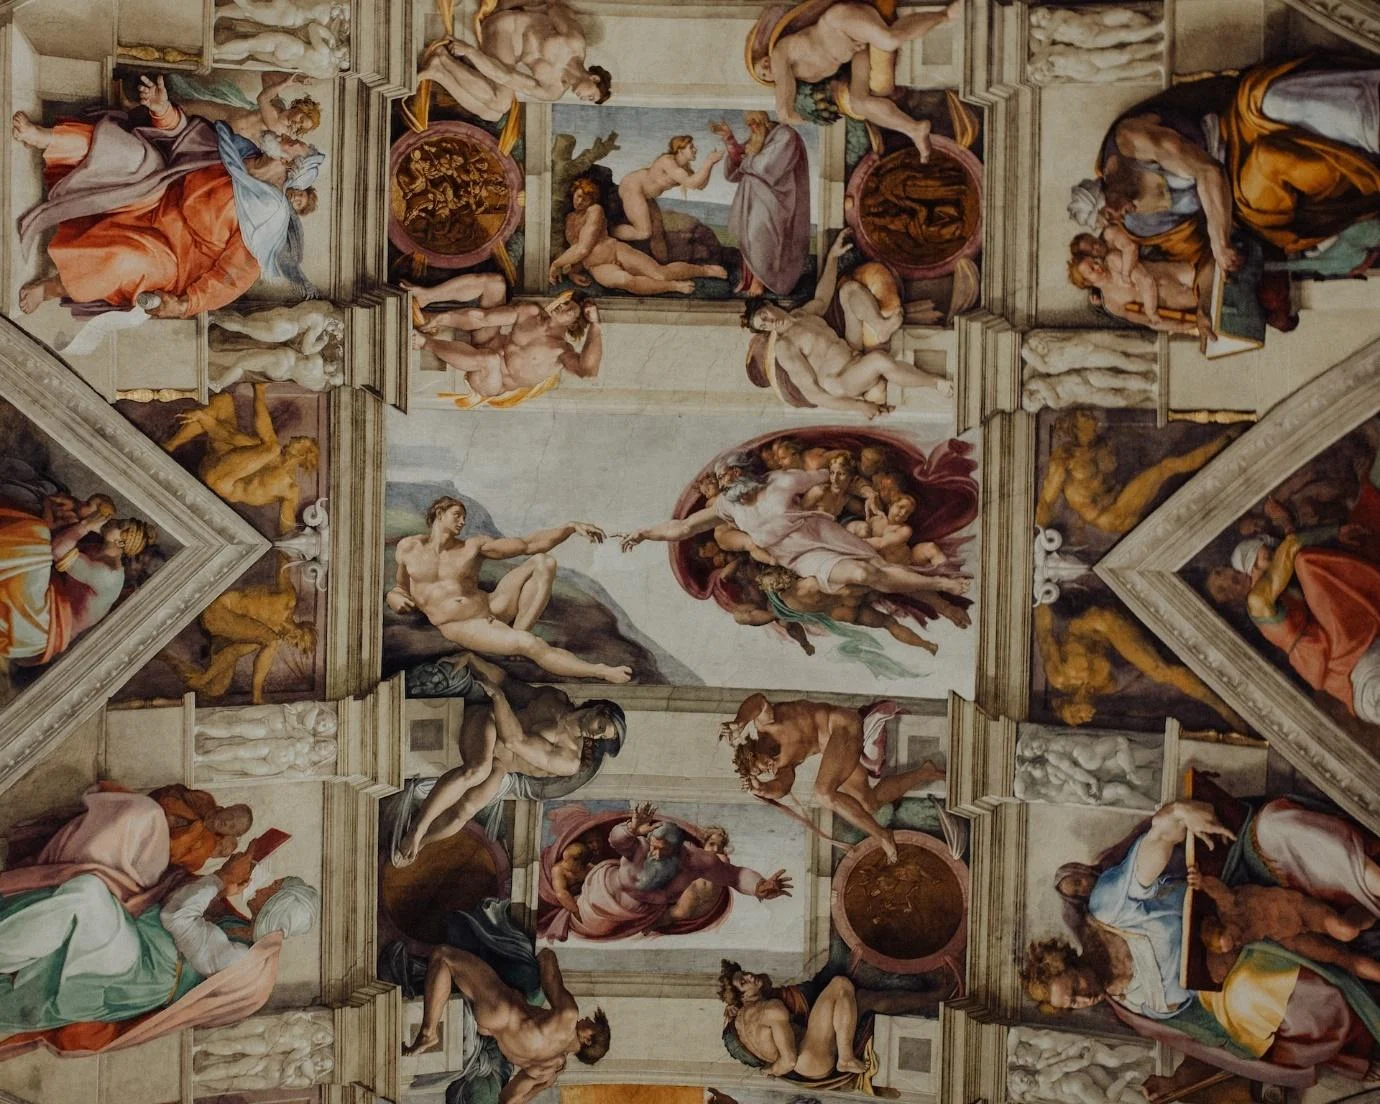 Sistine Chapel ceiling painted by Michelangelo during the Renaissance period.